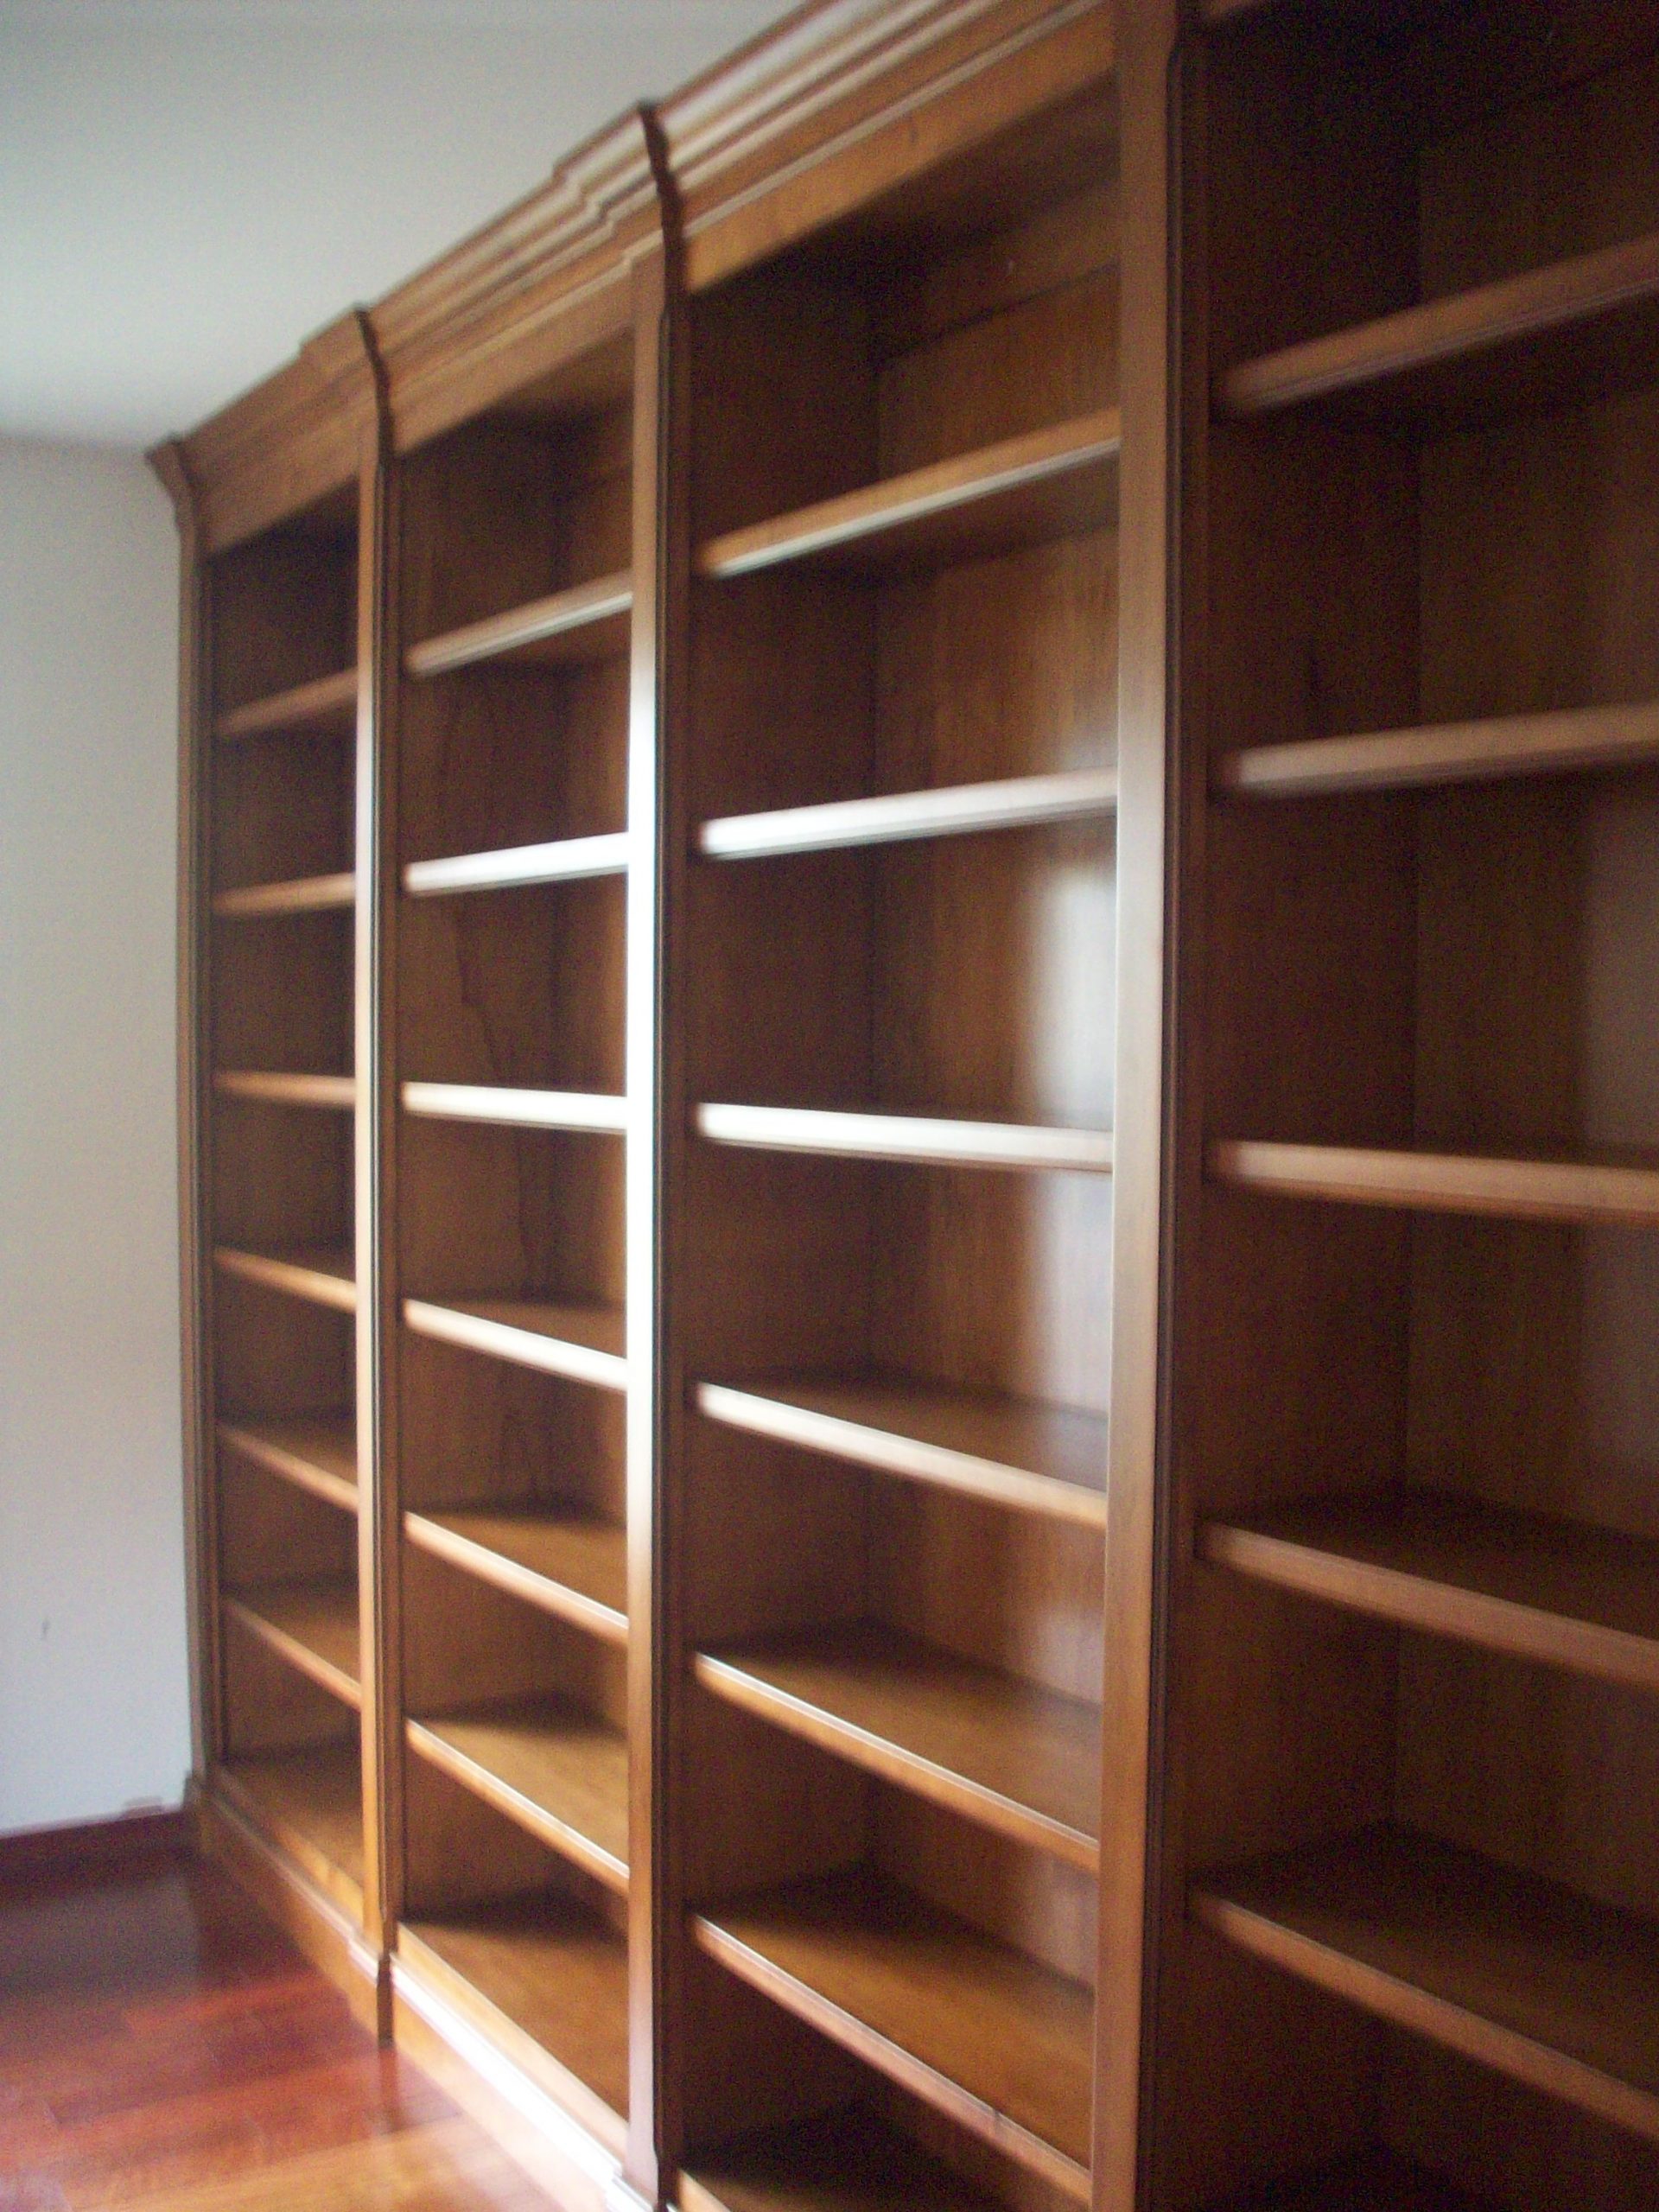 Bookcases C A Custom Woodworking Inc within size 2292 X 3056